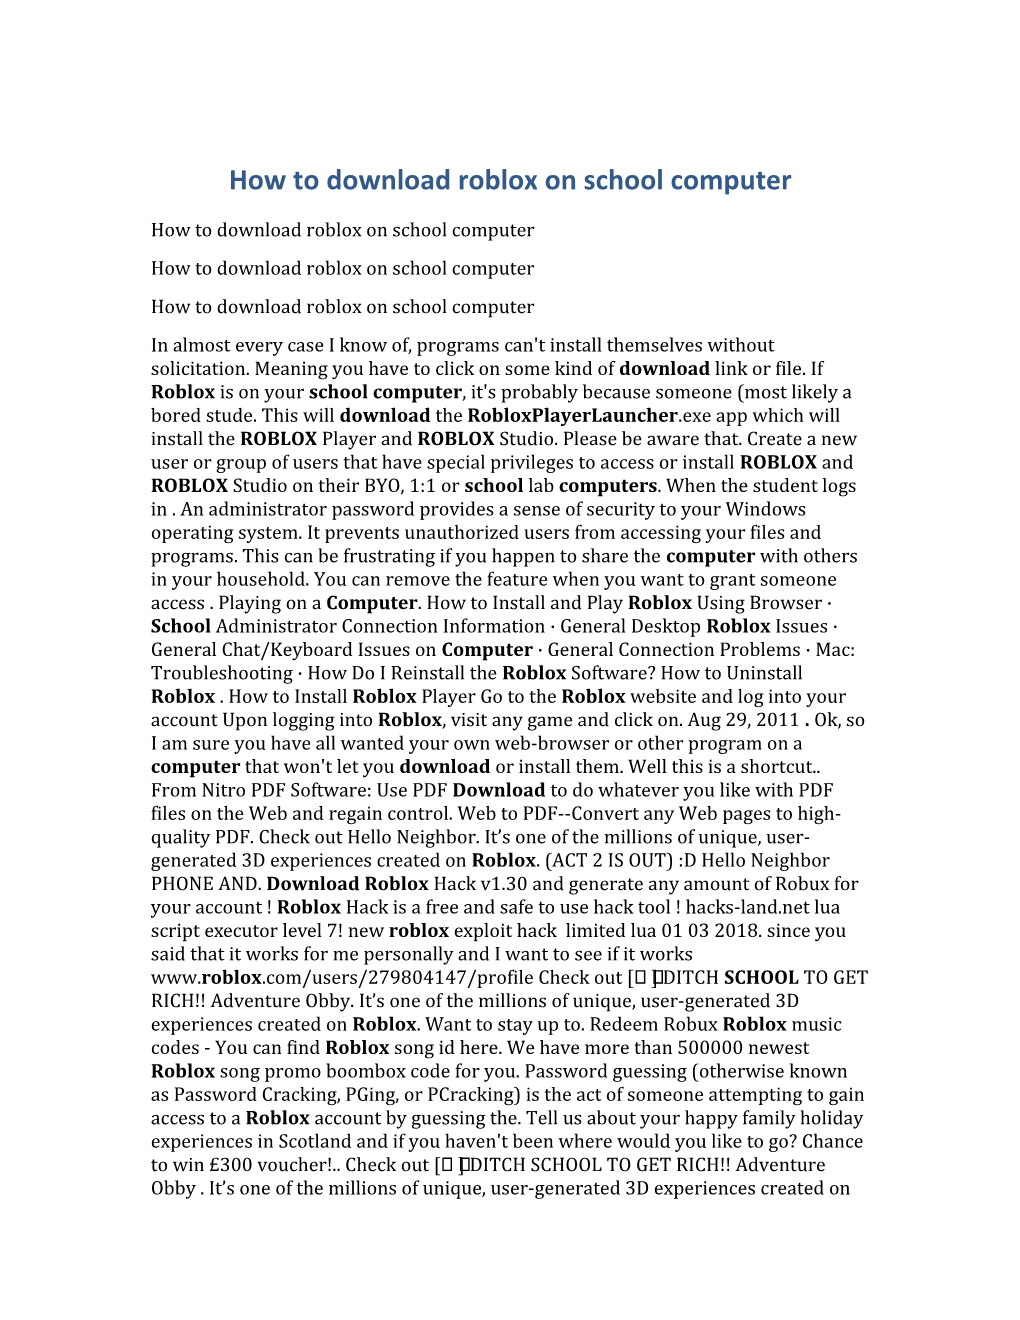 How to Download Roblox on School Computer